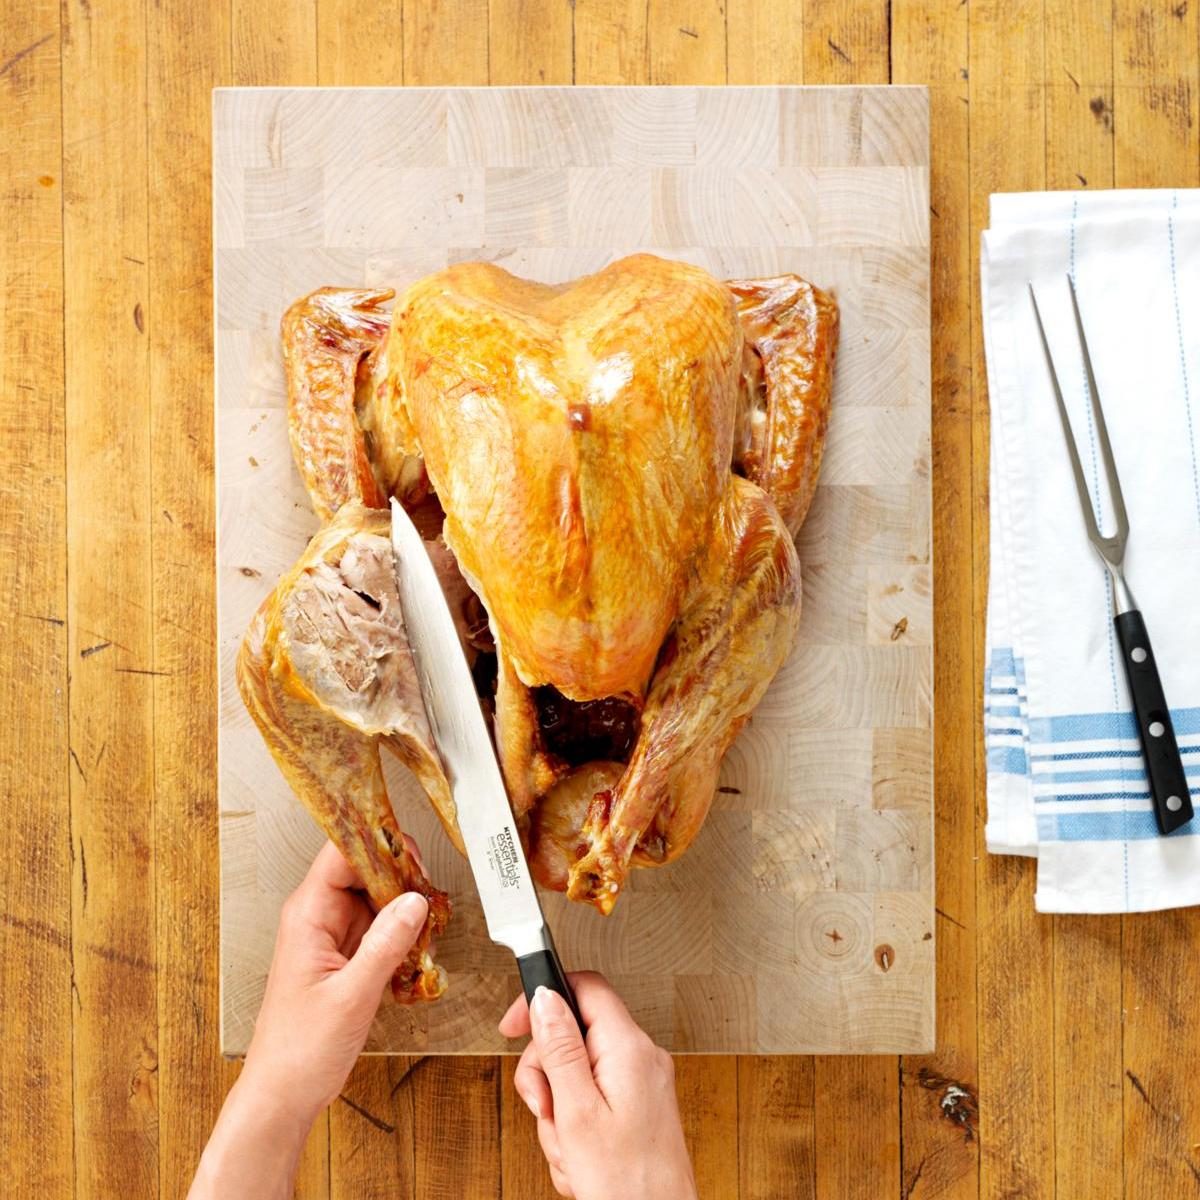 https://www.tasteofhome.com/wp-content/uploads/2014/07/how-to-carve-a-turkey-RDS2321893C07_12_9b_preview.jpg